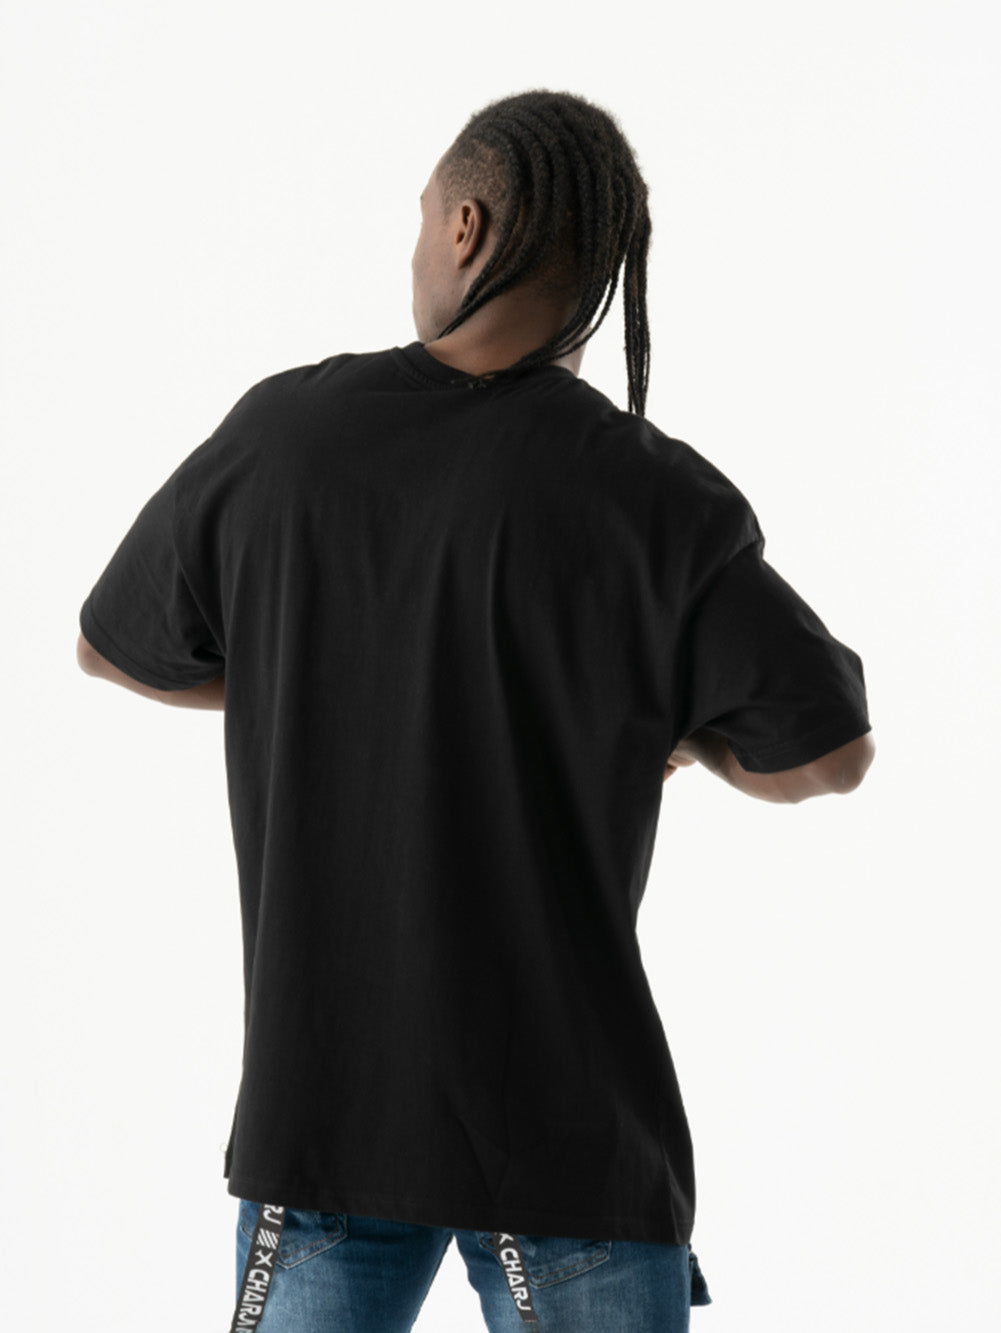 The relaxed back of a man wearing a comfortable TURRET T-SHIRT.